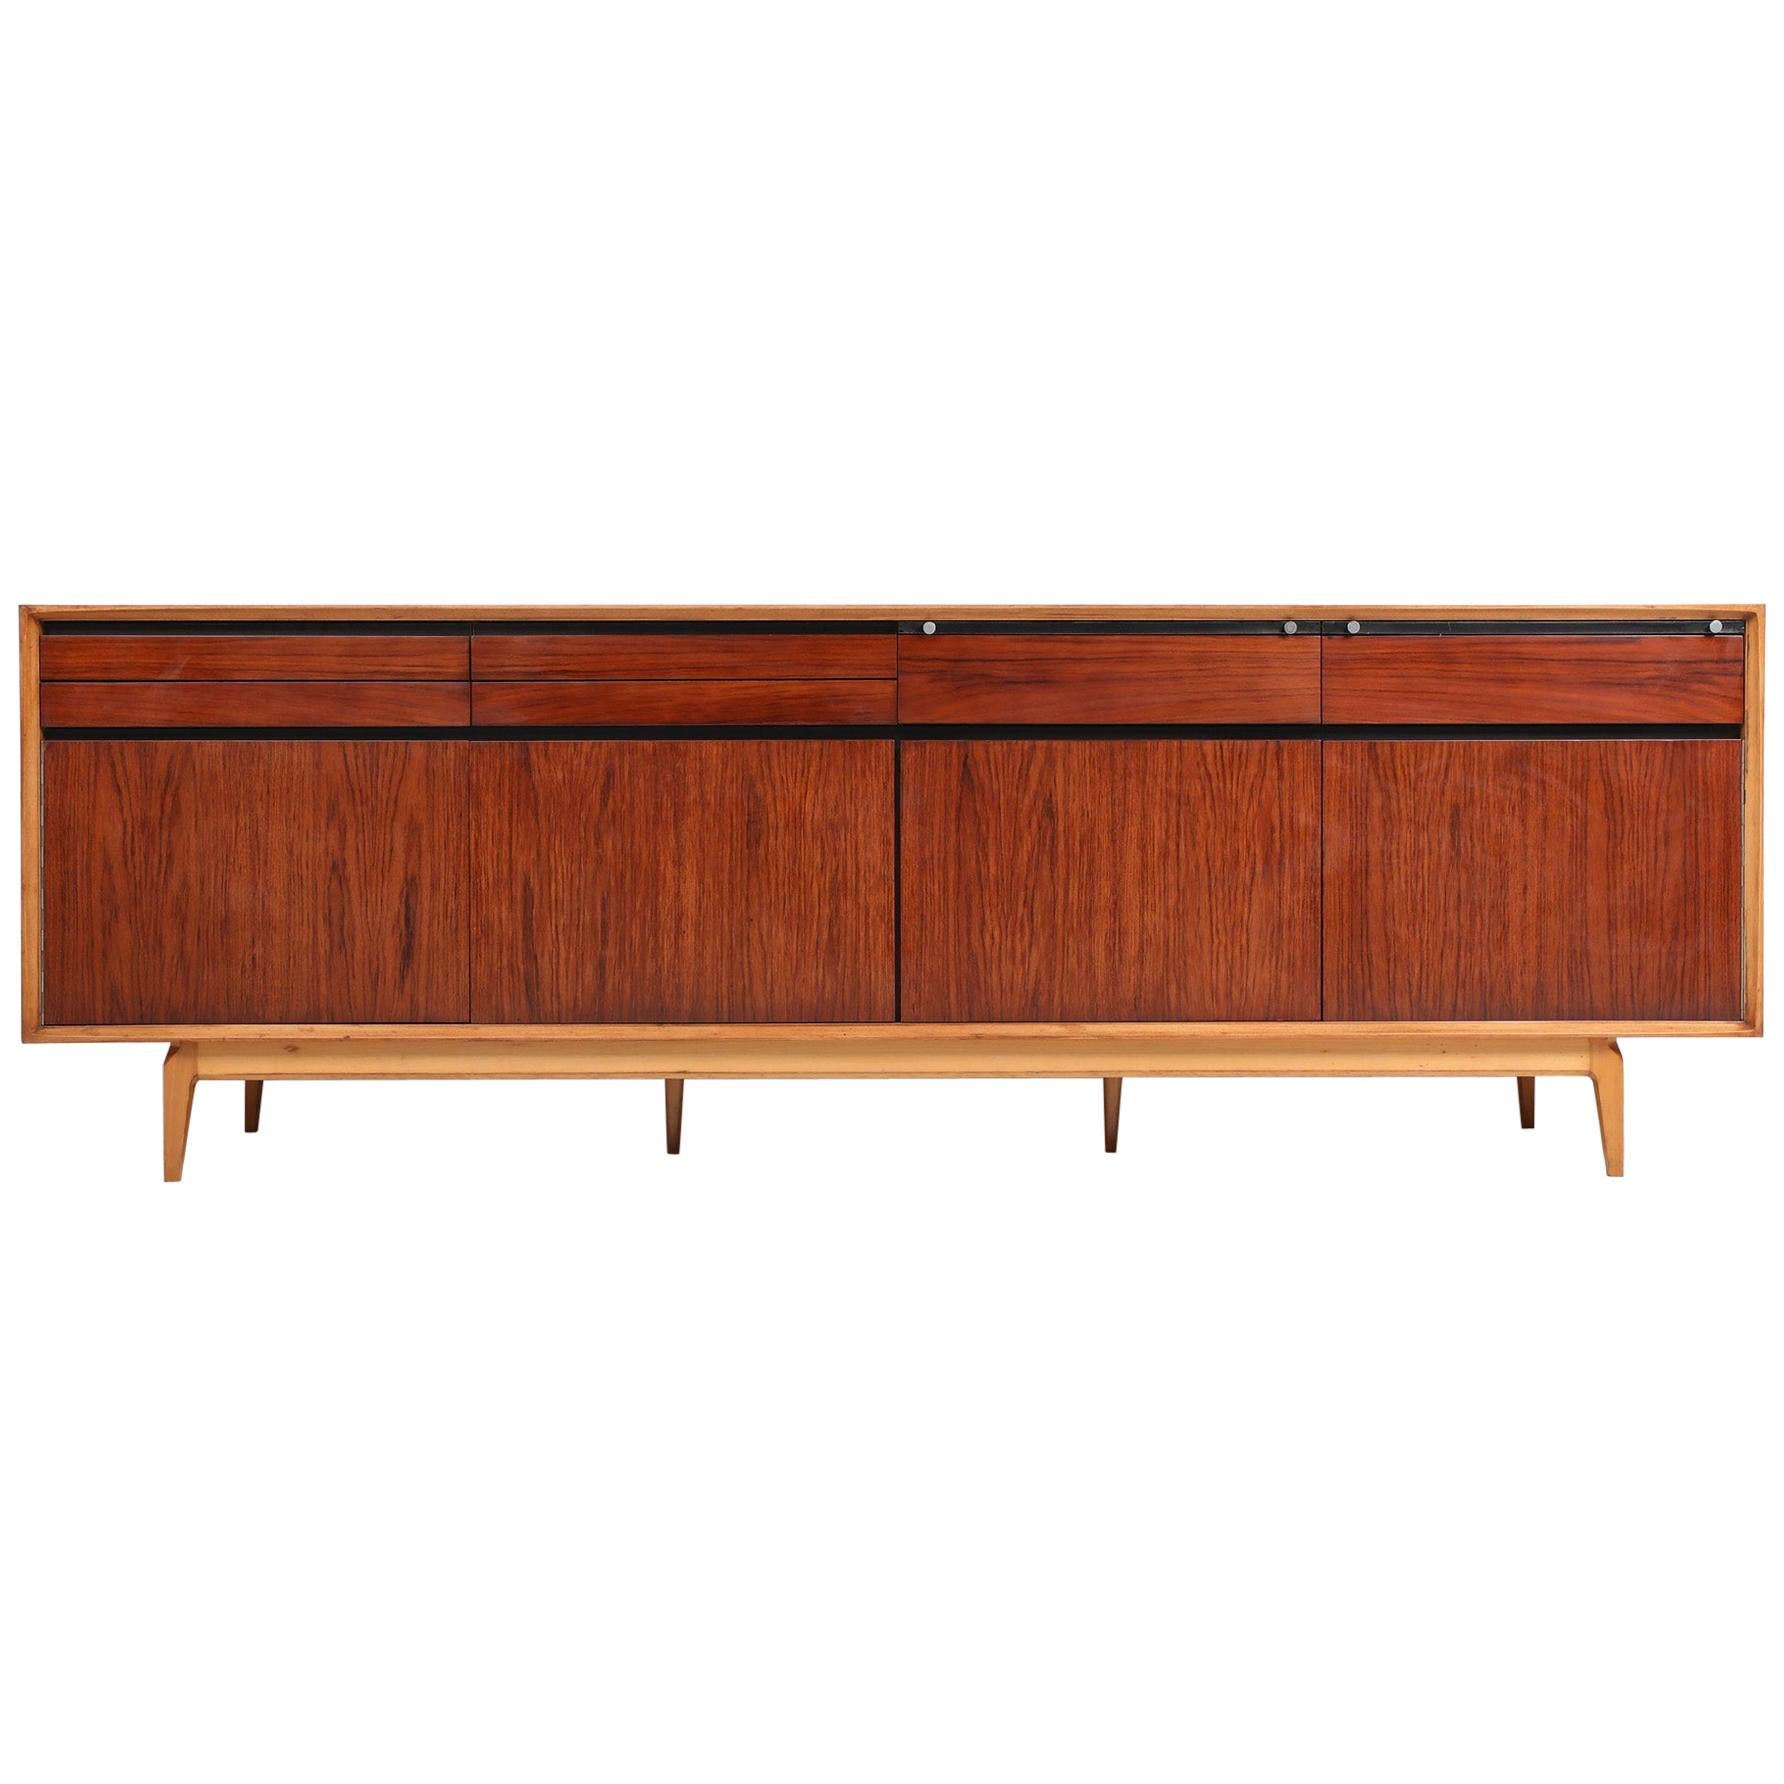 De Coene Madison Credenza in Rosewood and Walnut